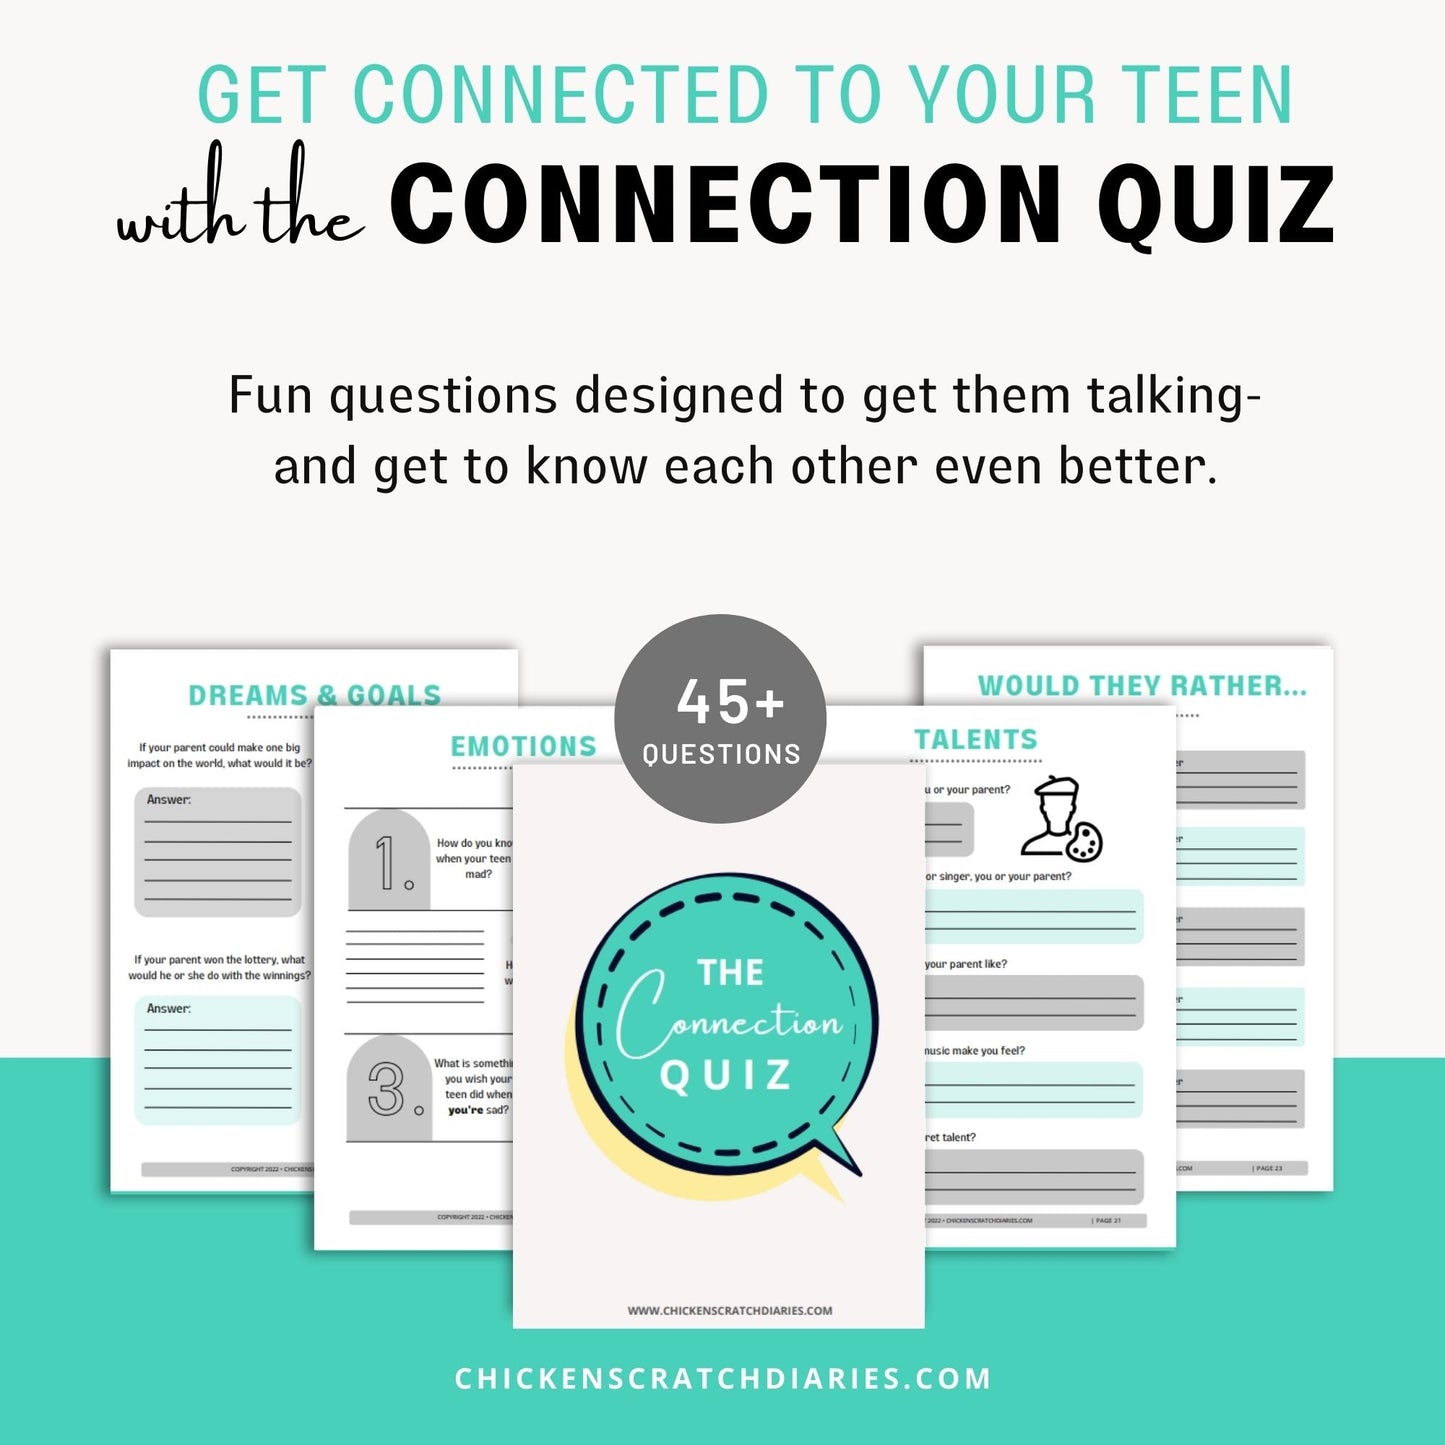 The Connection Quiz